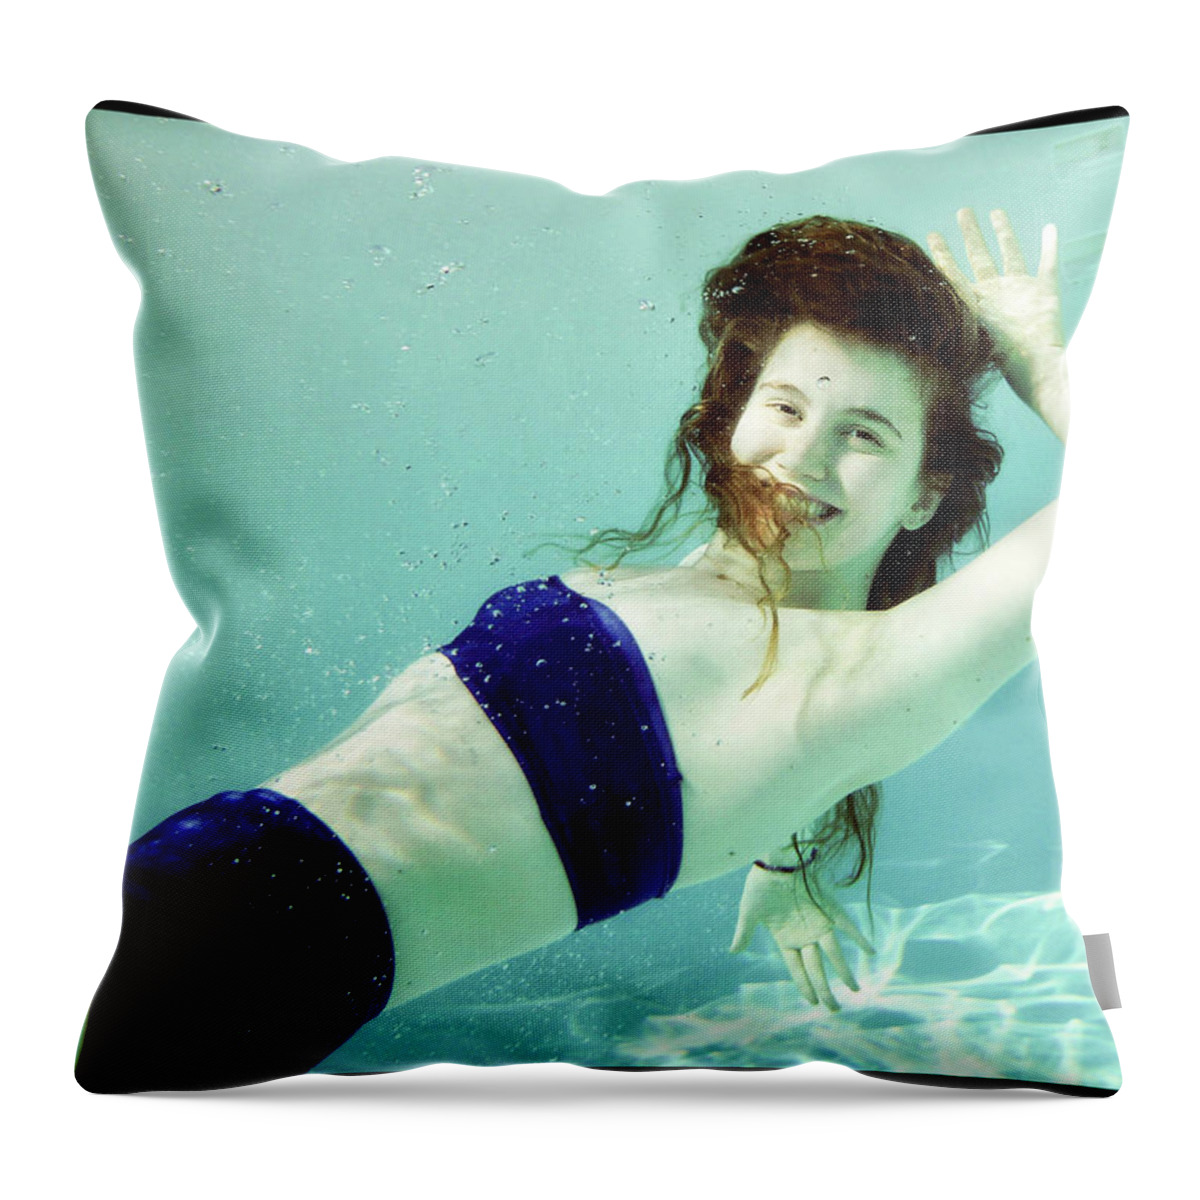 Underwater Throw Pillow featuring the photograph Pool Girl by D Malone